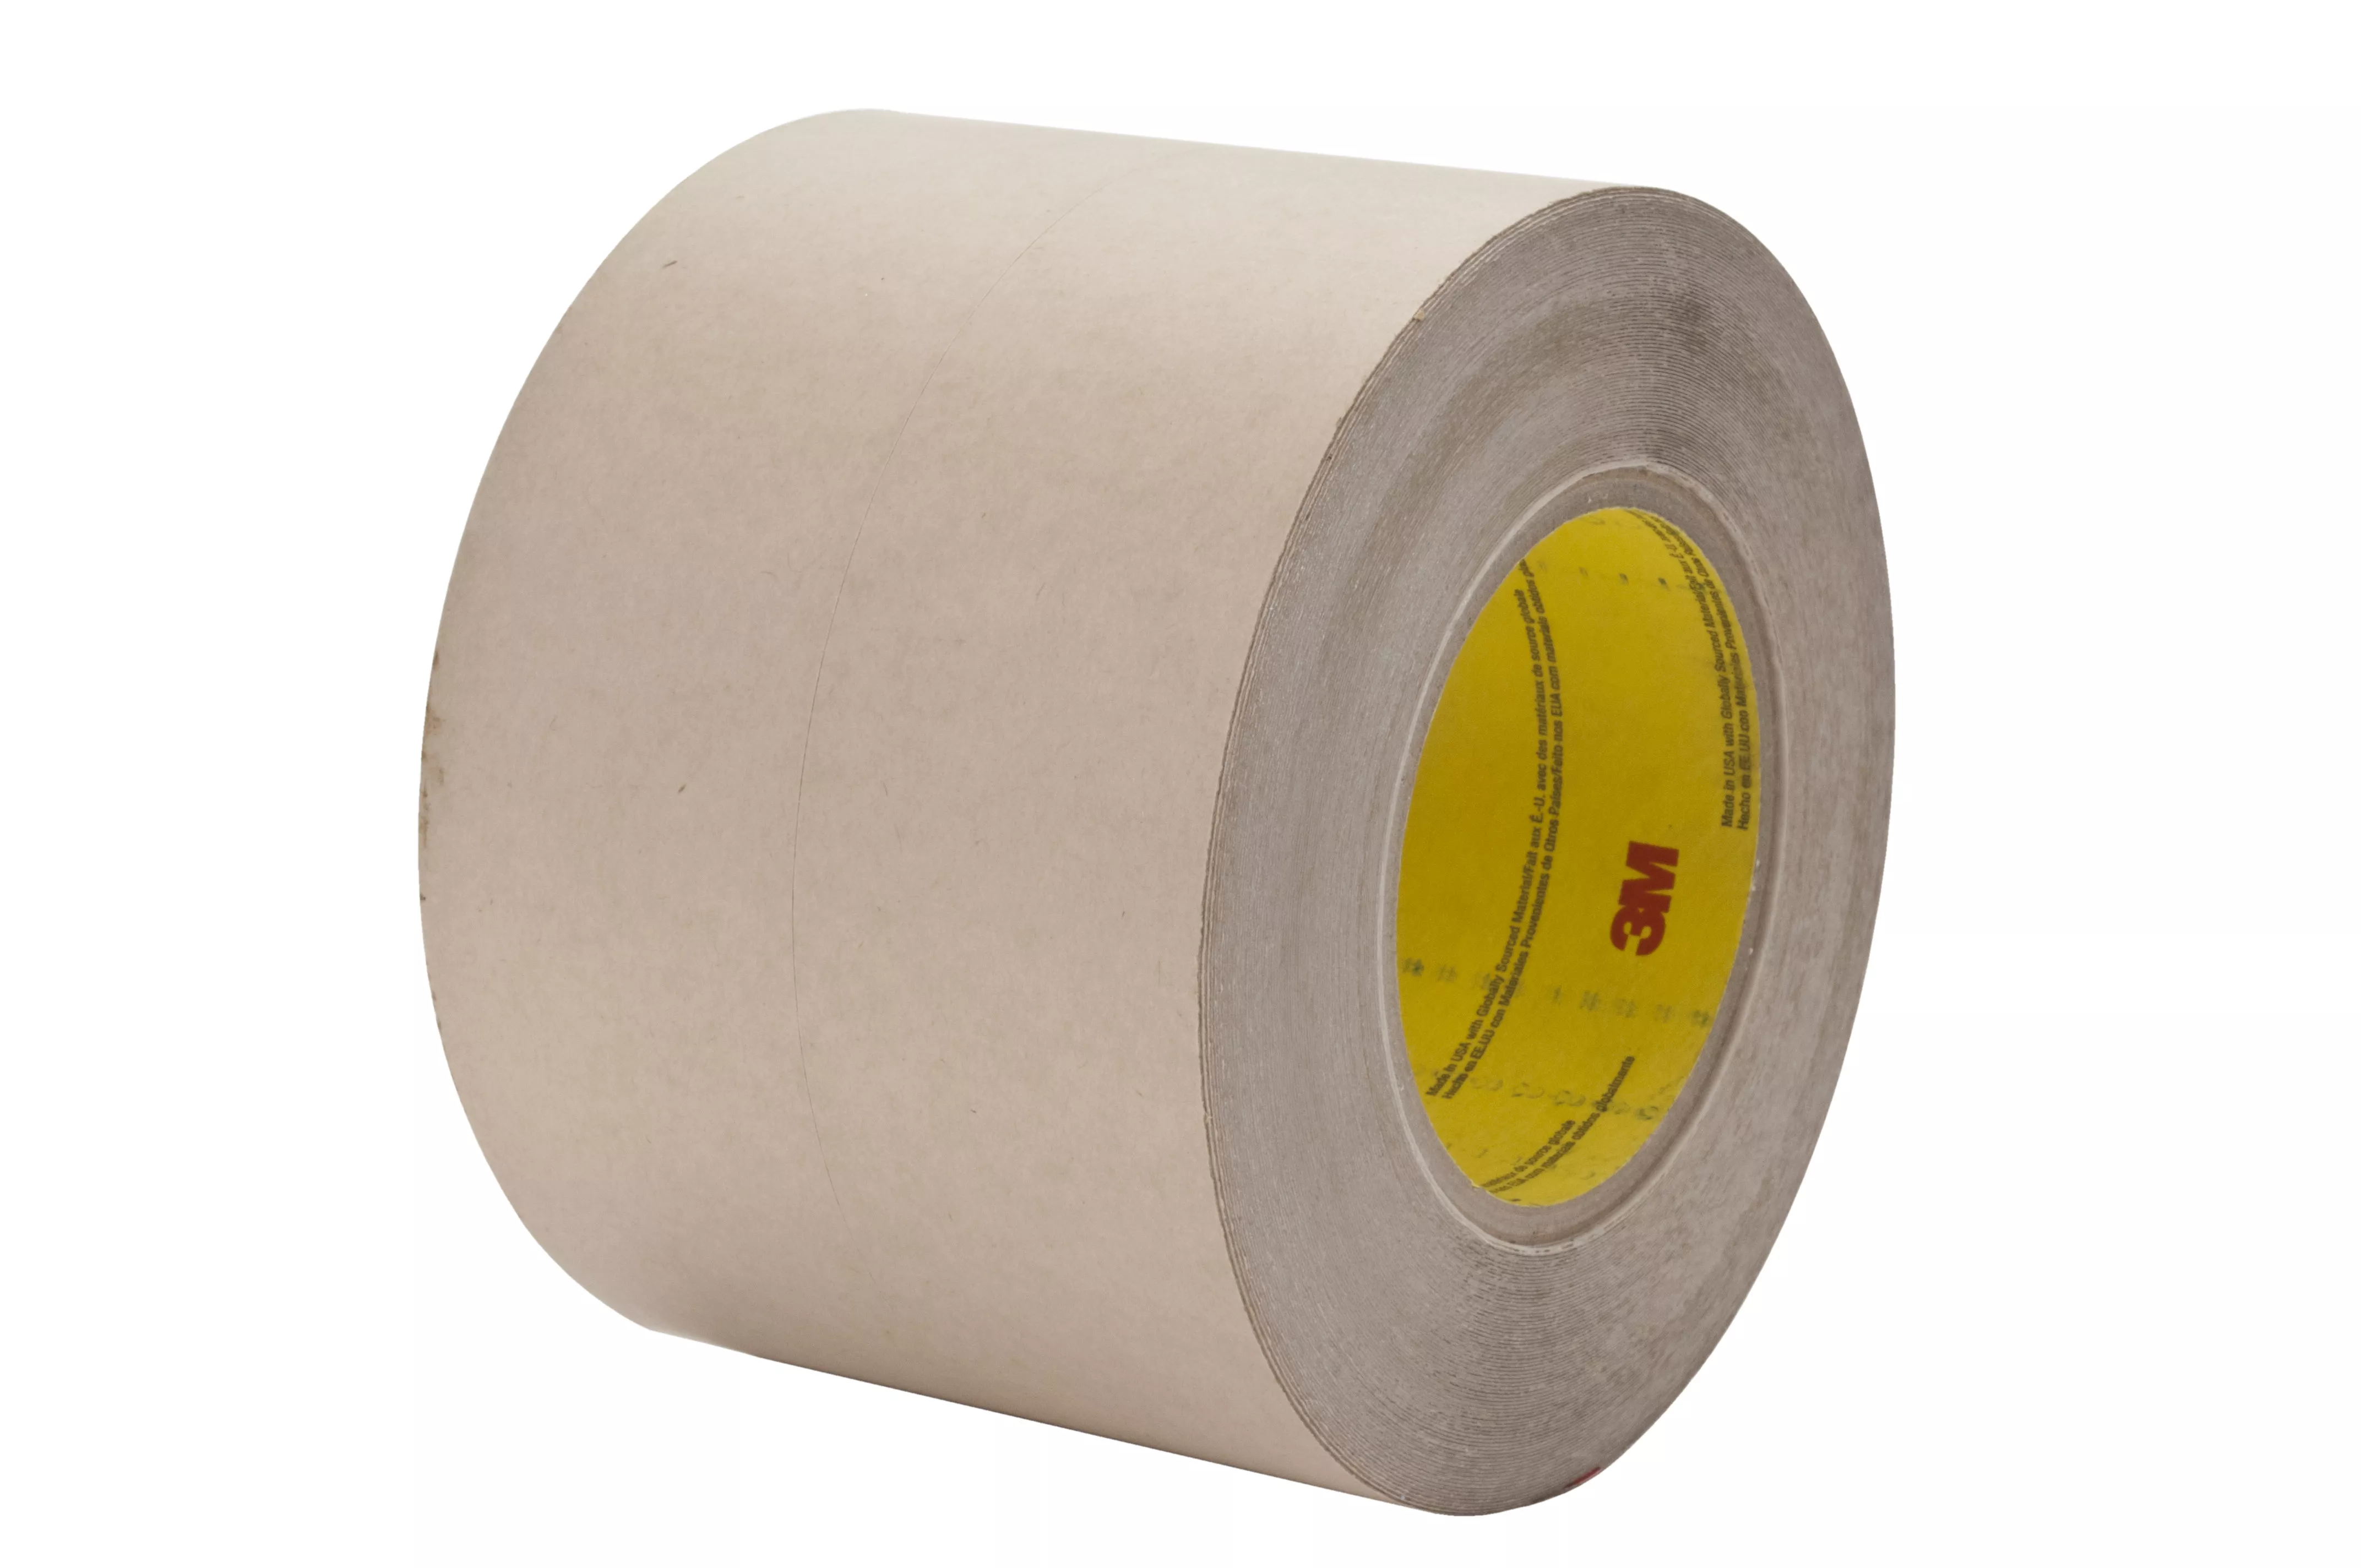 3M™ Sealing Tape 8777, Tan, 1 in x 75 ft, 36 Rolls/Case, Solid Liner